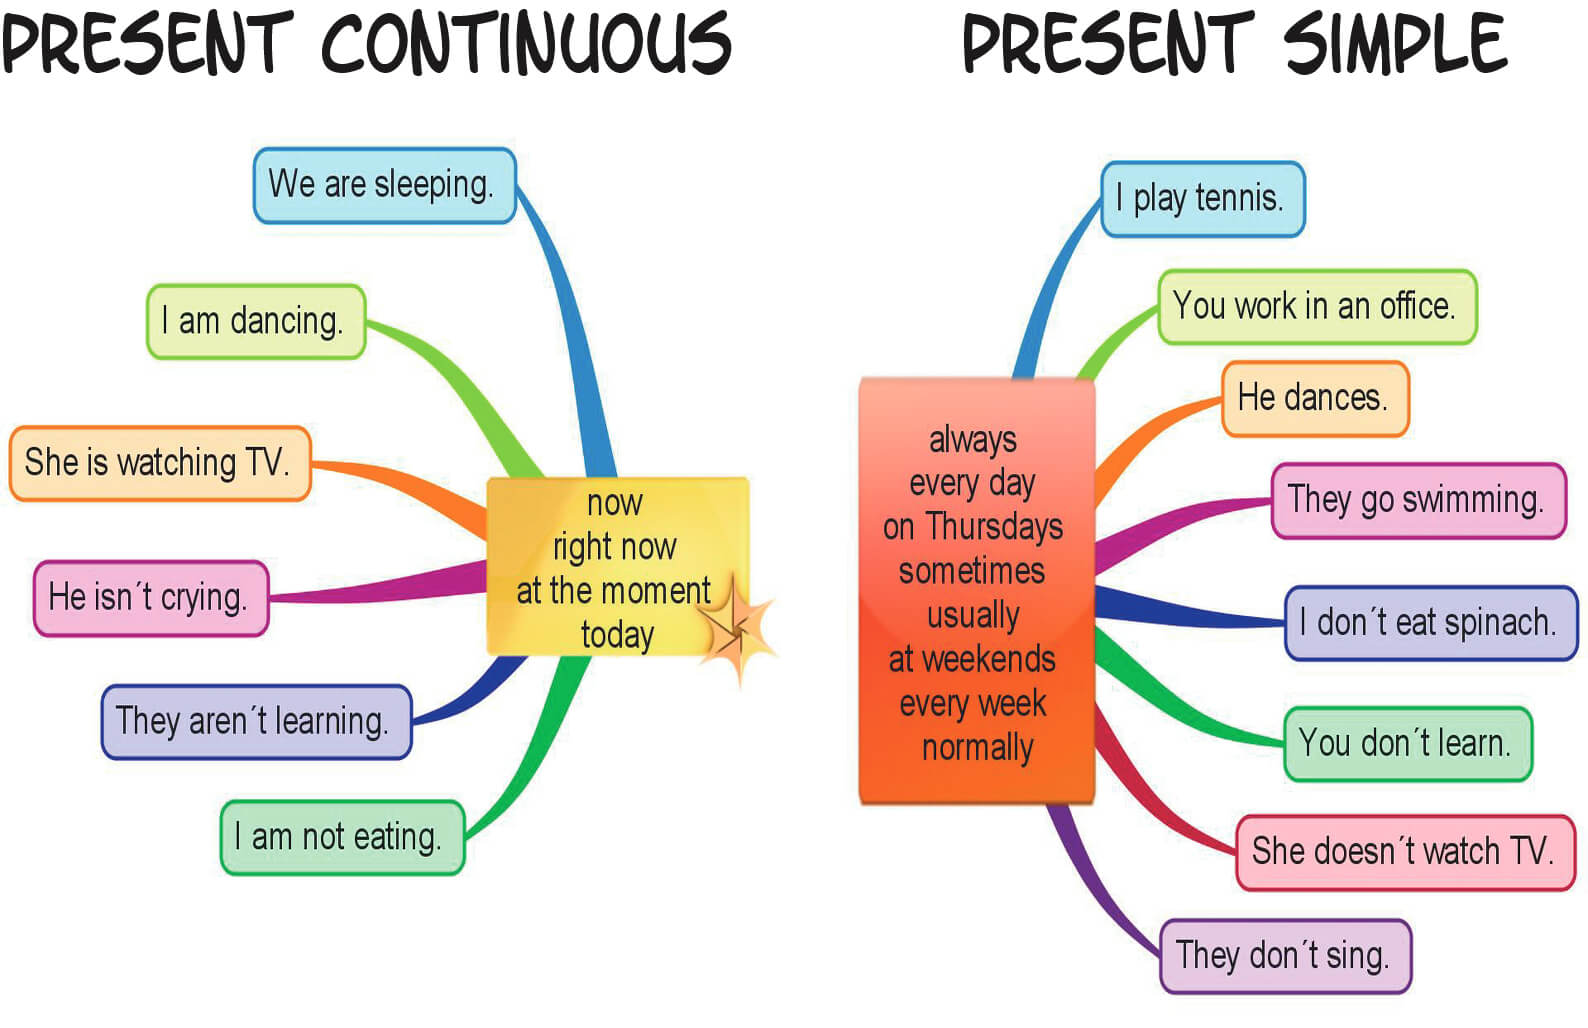 https://learnenglishkids.britishcouncil.org/en/grammar-practice/present-simple-and-present-continuous